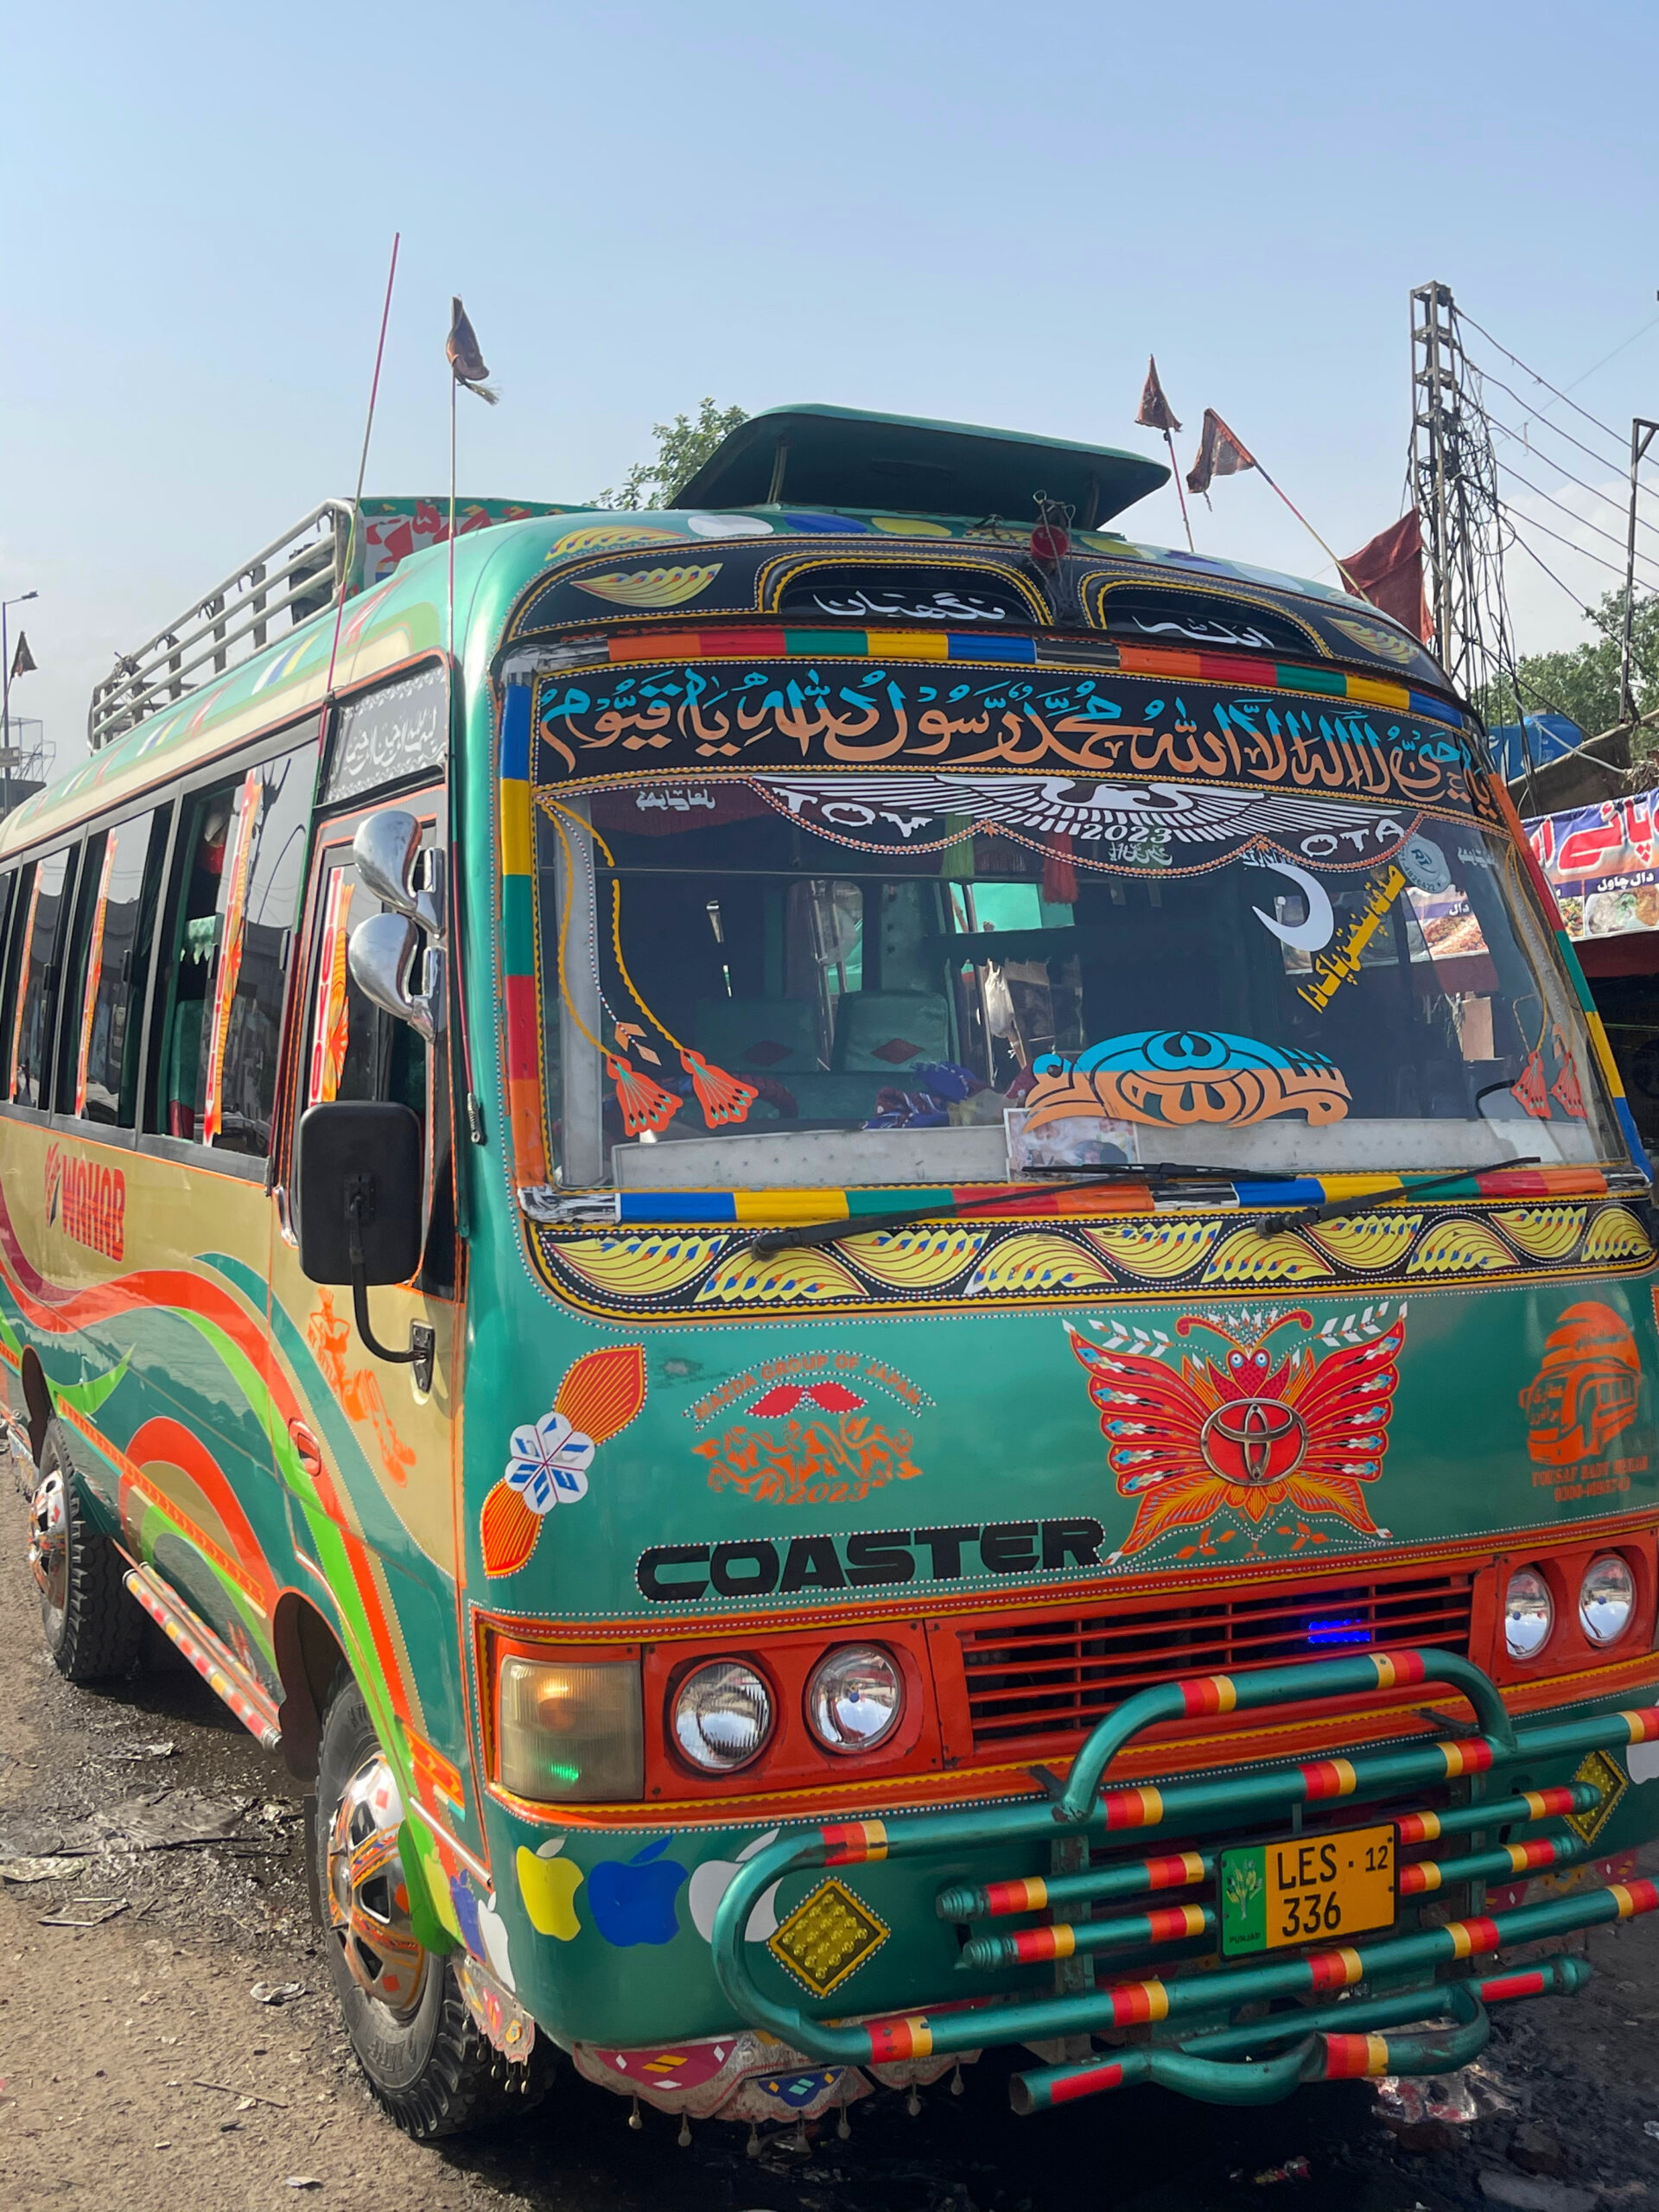 a colourful van or public bus in Lahore